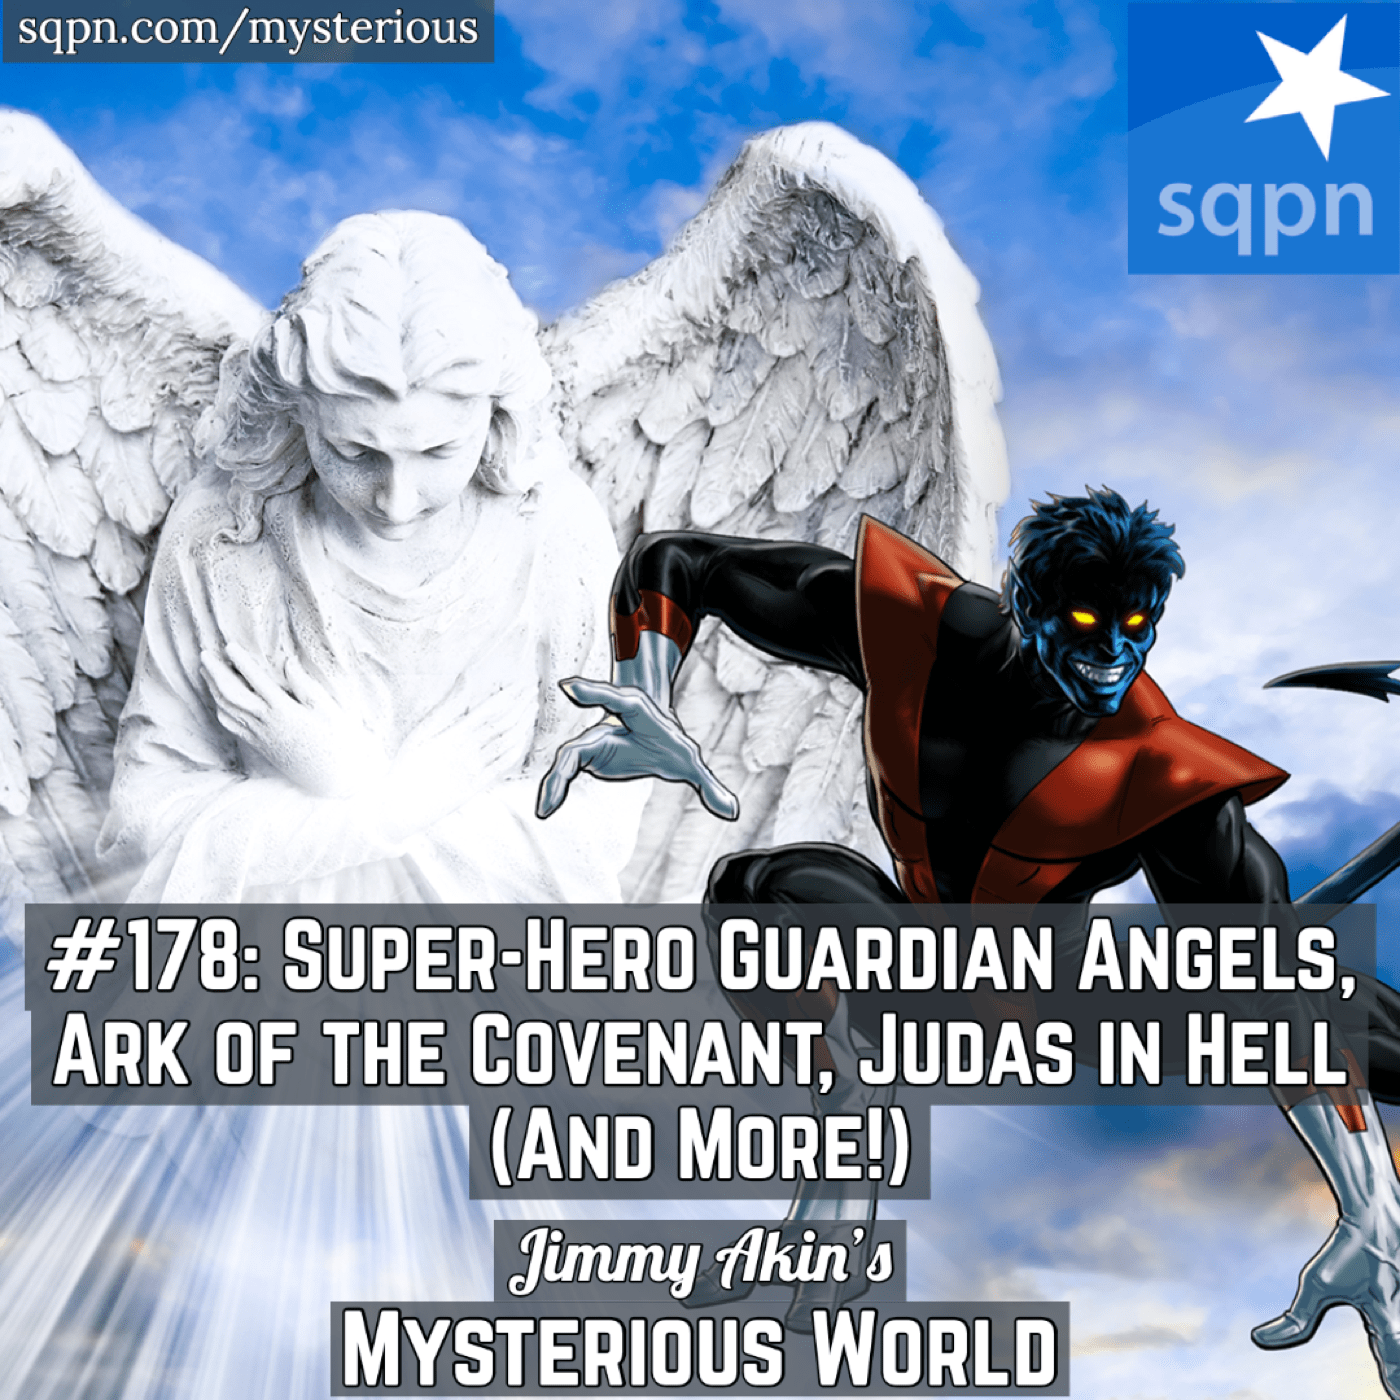 Superhero Guardian Angels, Ark of the Covenant, Judas in Hell & More Weird Questions